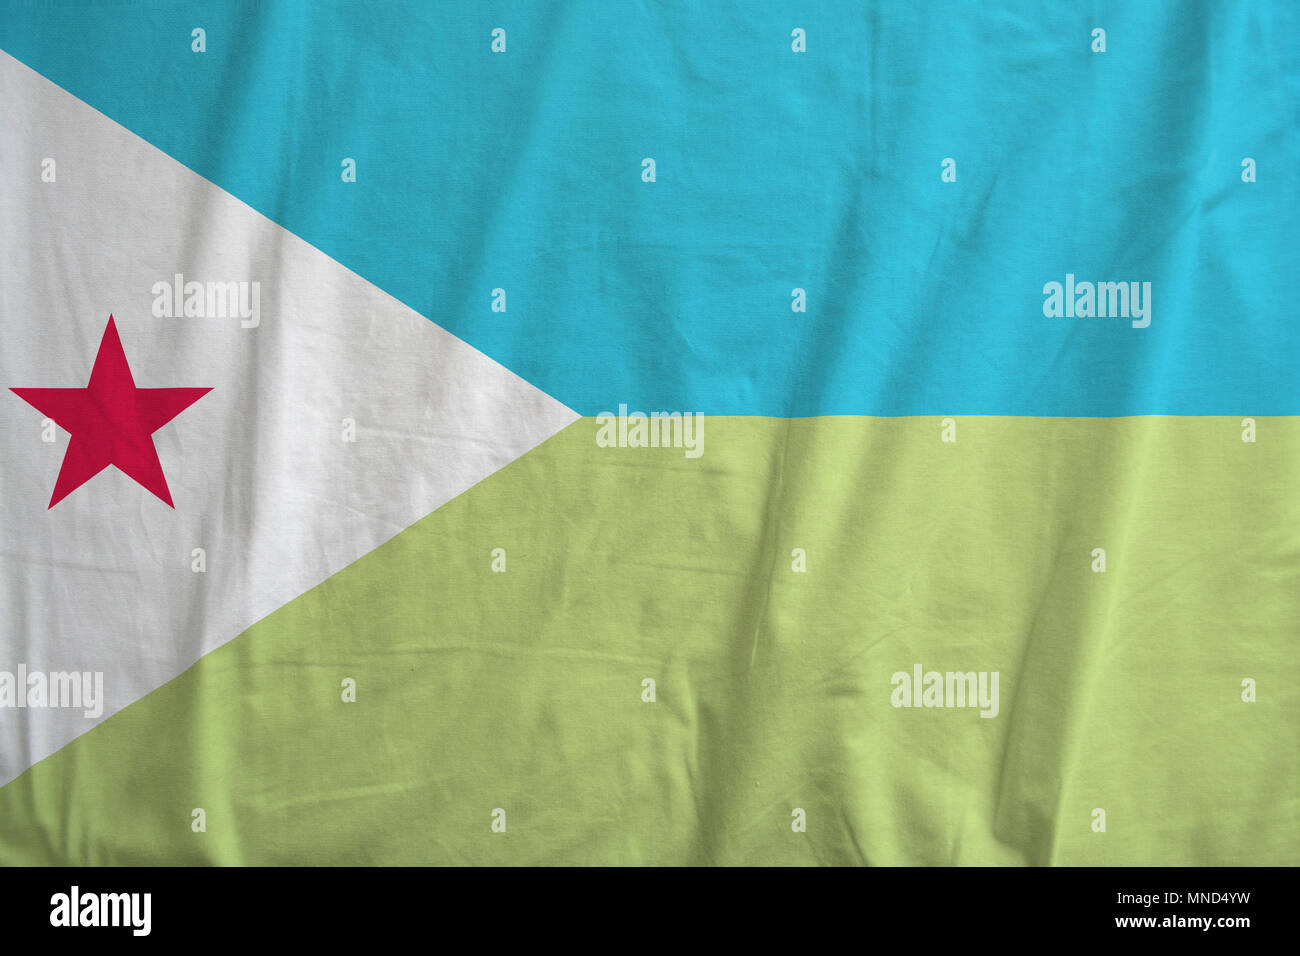 Flag of Djibouti waving in the wind detail. Stock Photo